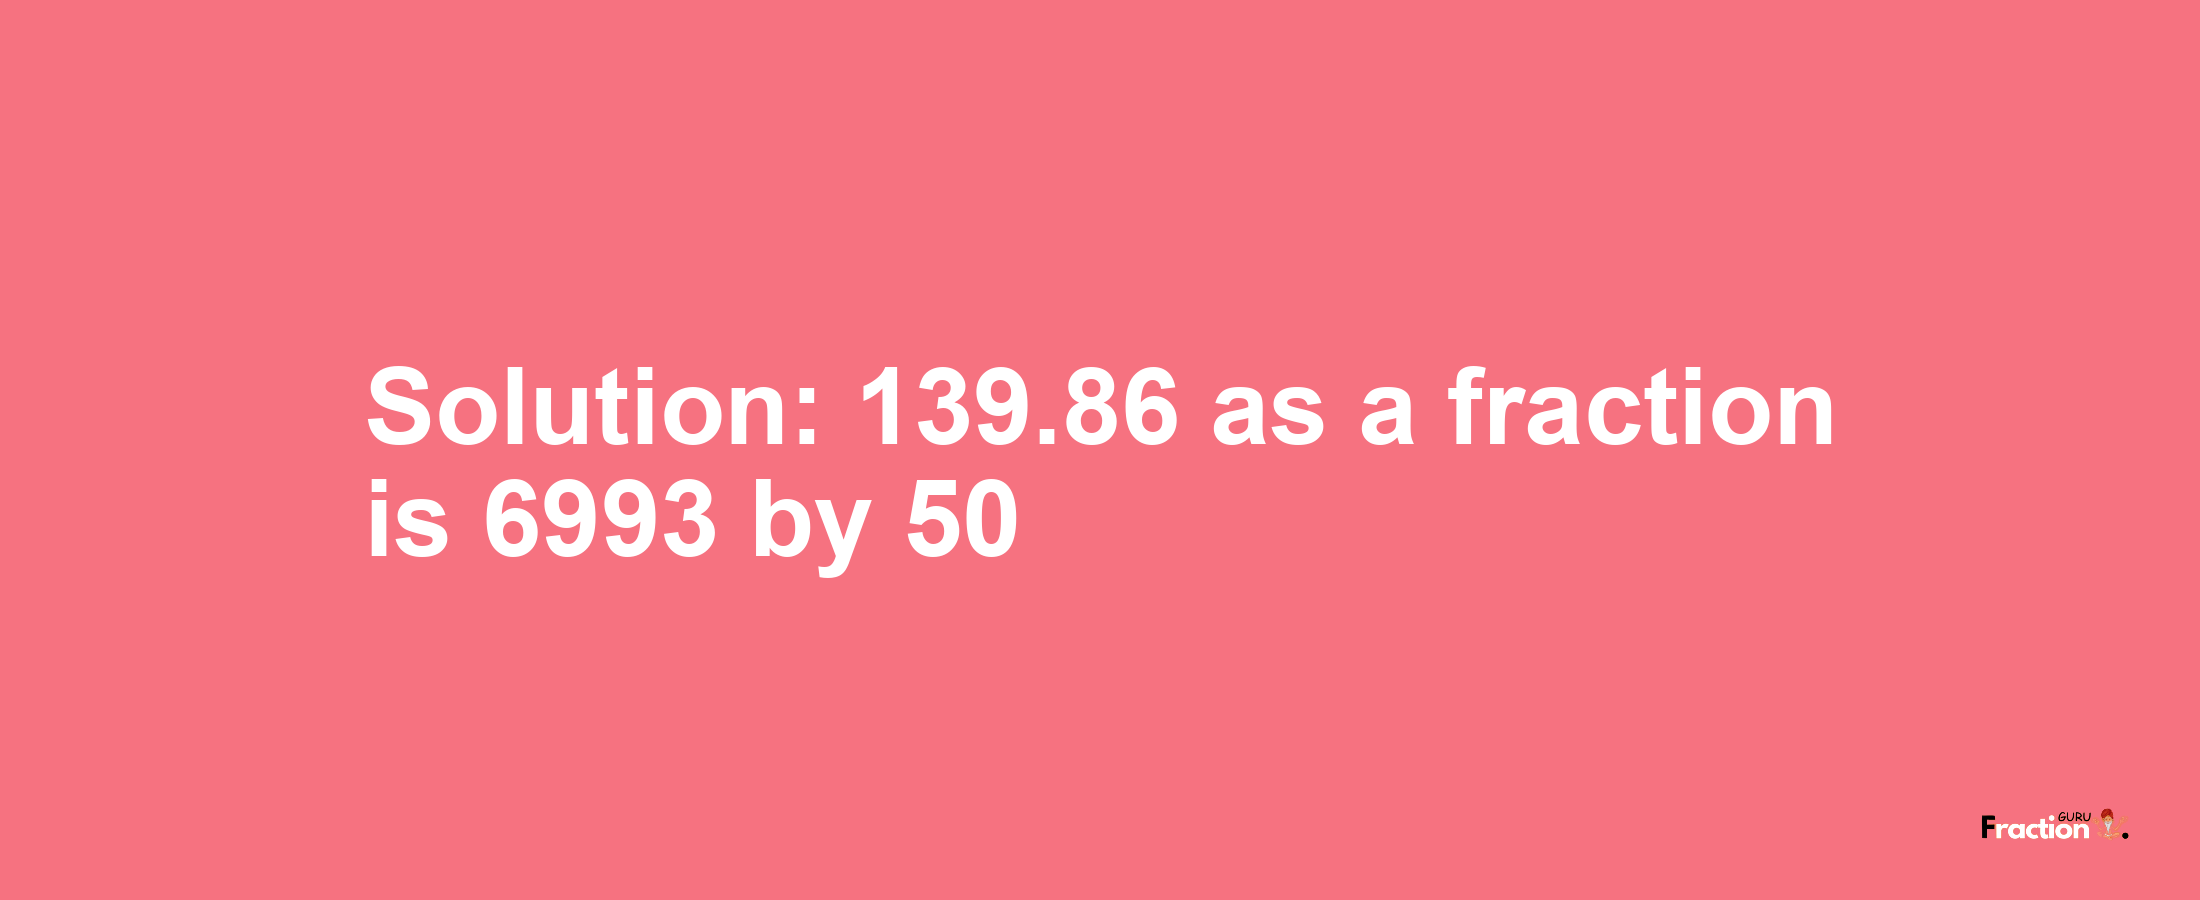 Solution:139.86 as a fraction is 6993/50